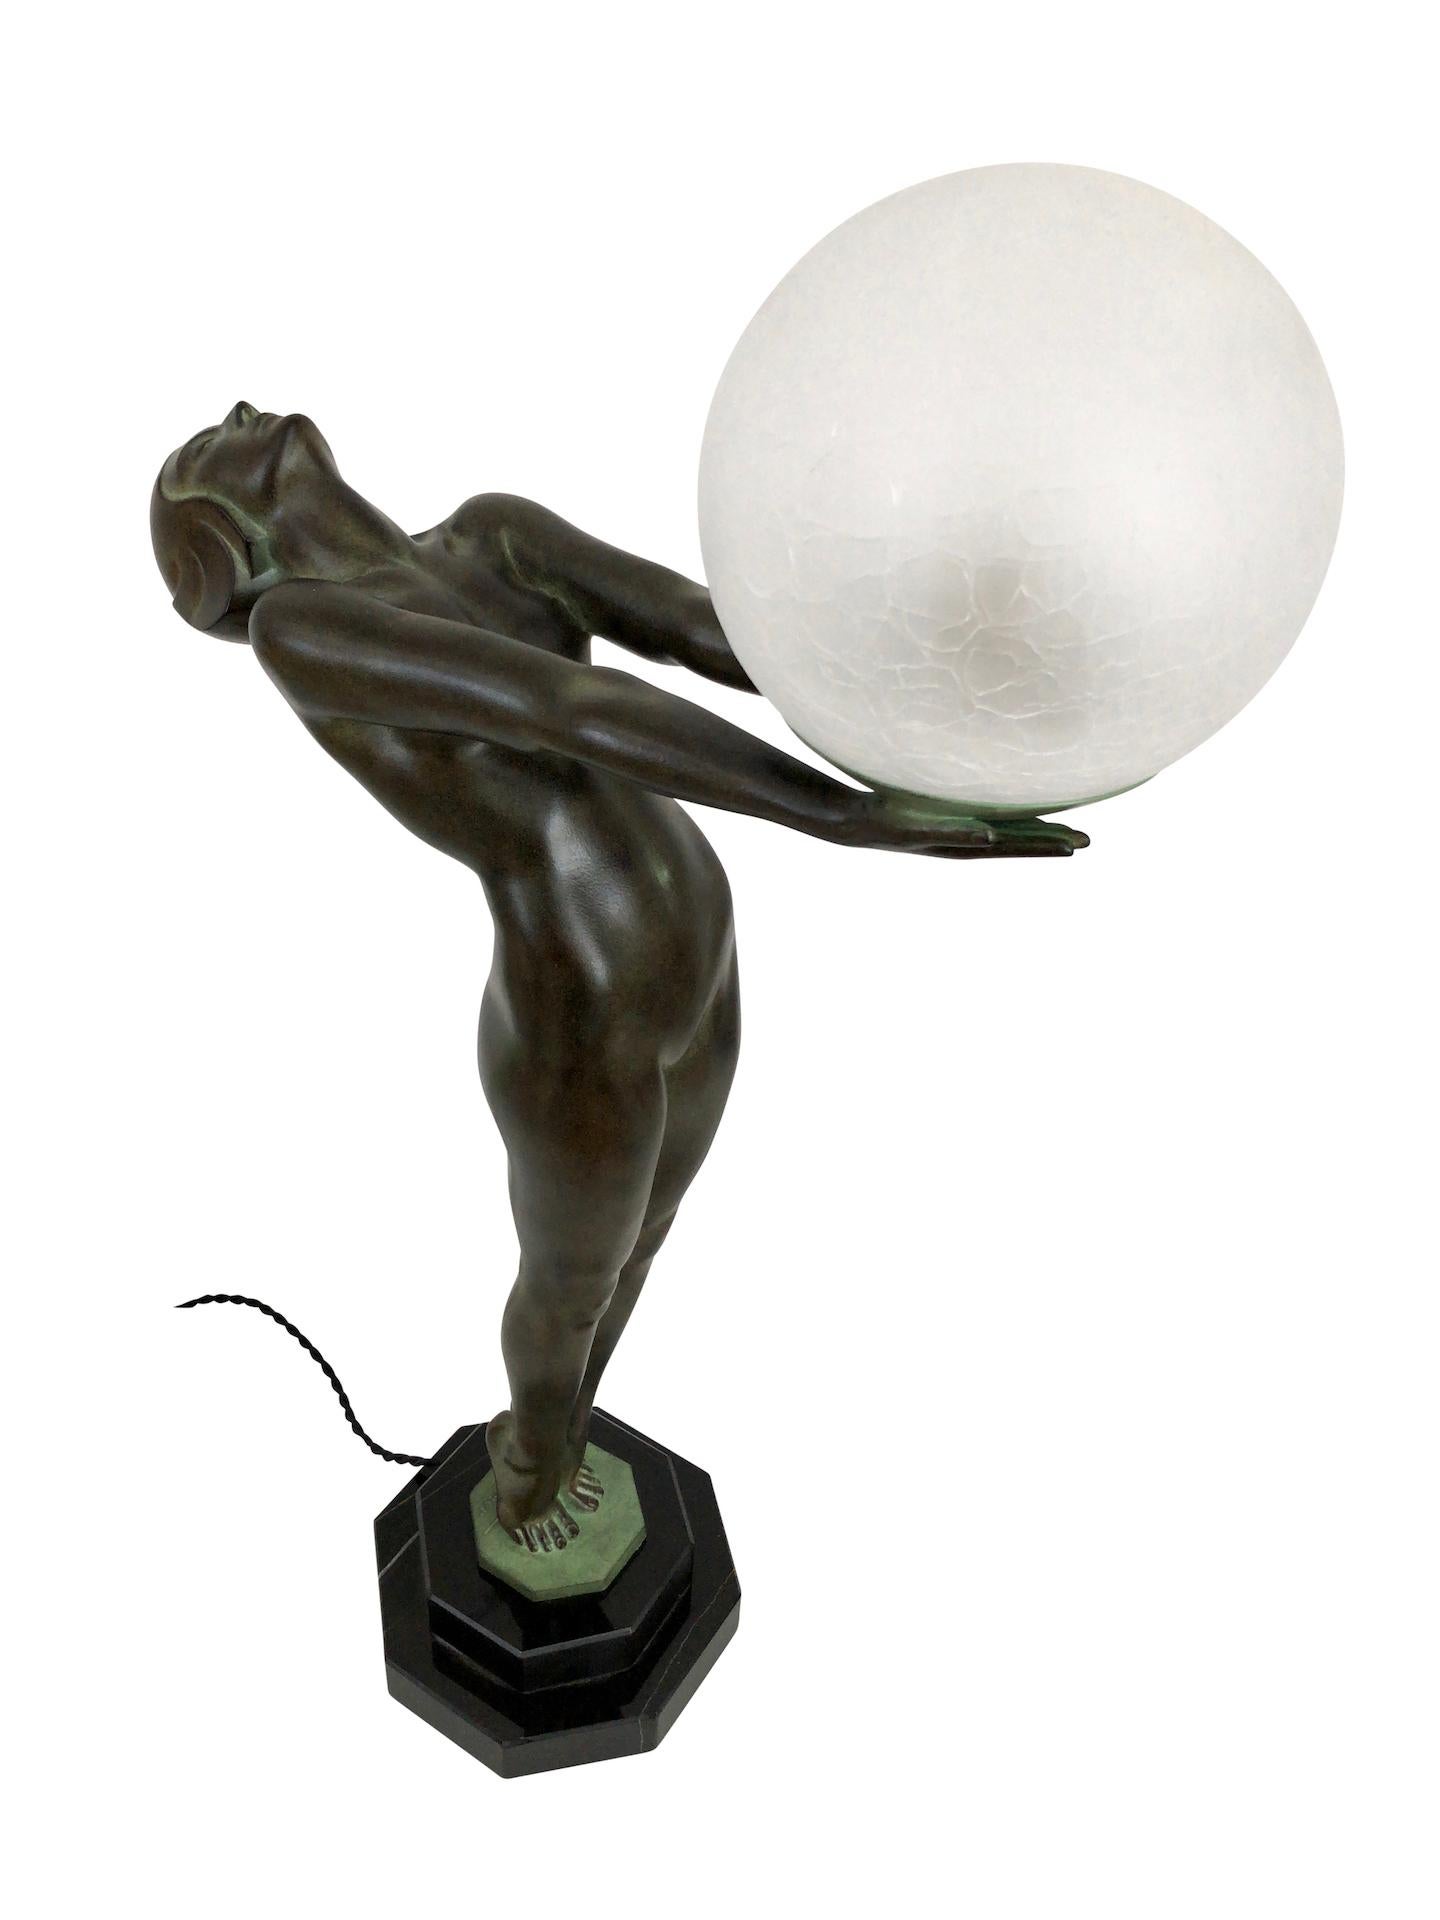 Patinated Art Deco Lumina Sculpture Clarté Lamp Nude Dancer with a Ball by Max Le Verrier For Sale